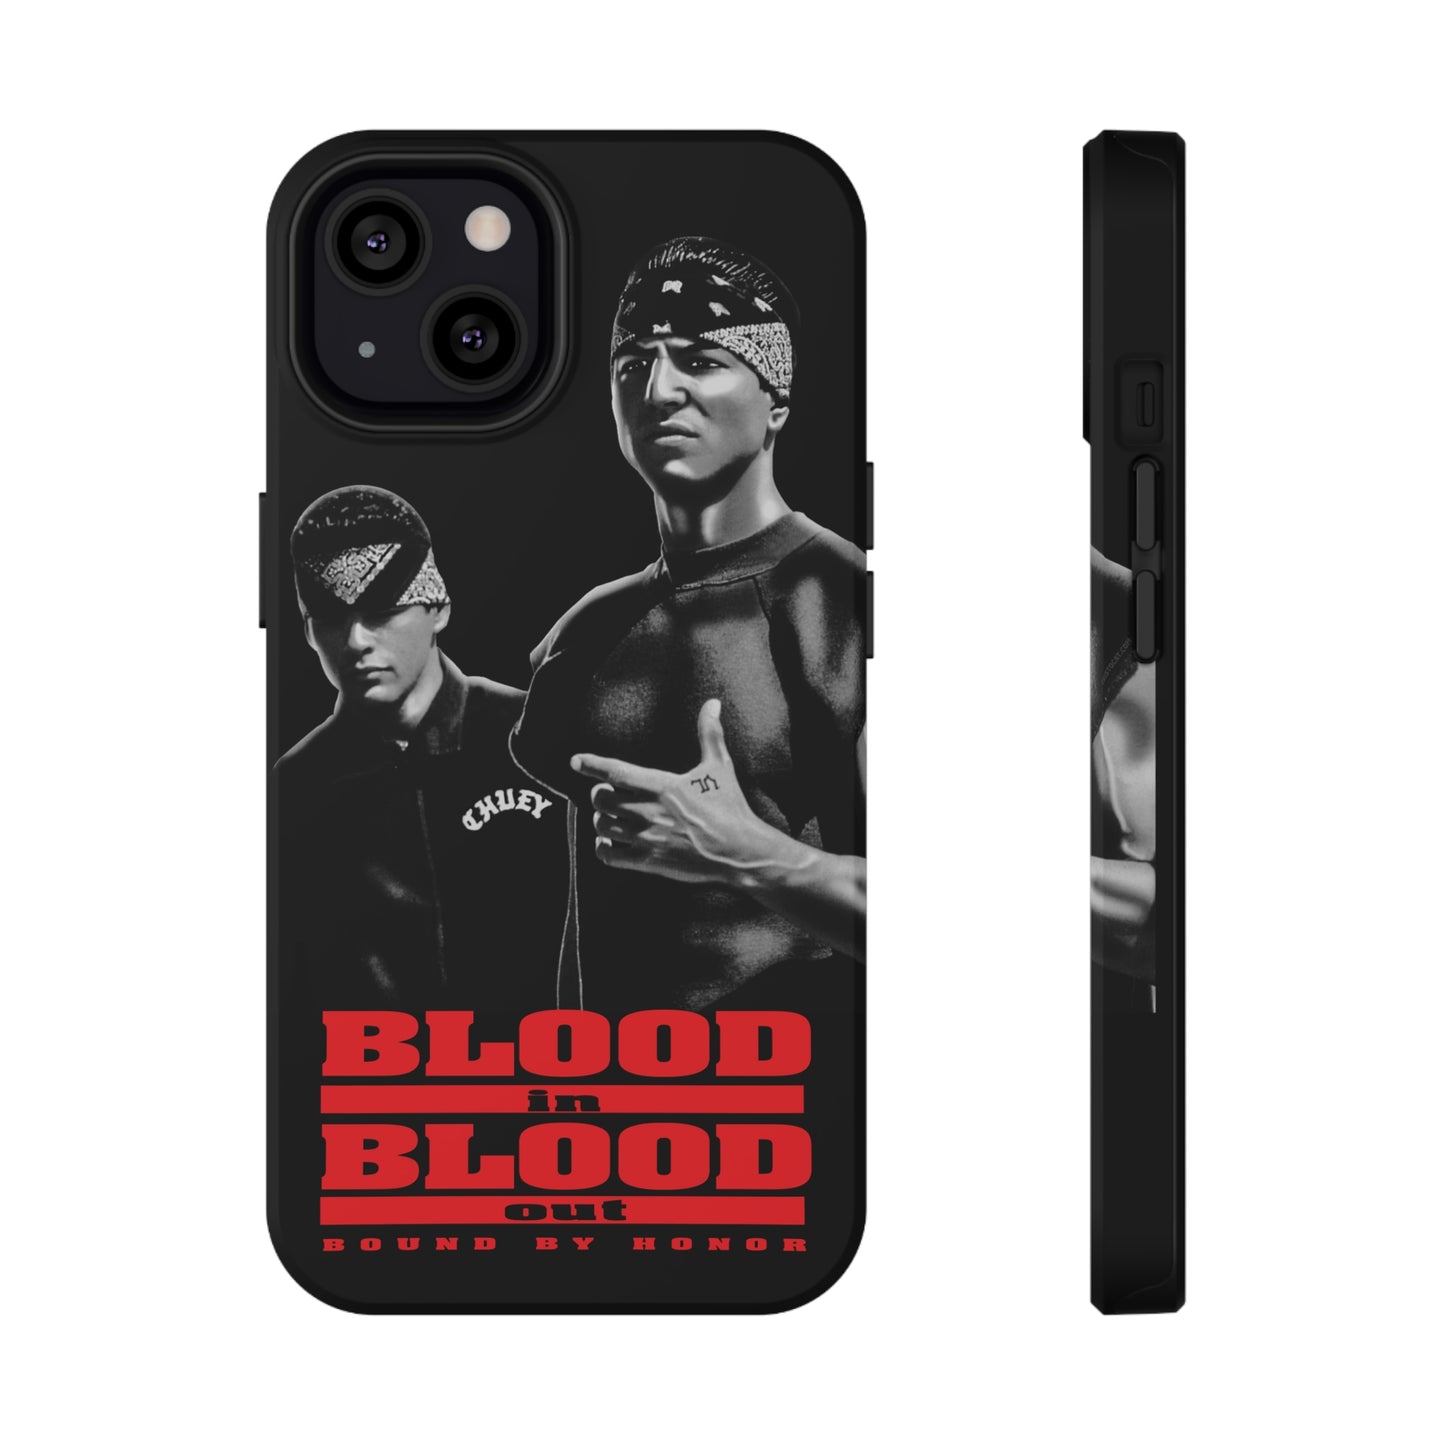 BLOOD IN BLOOD OUT PHONE CASE FOR THE VATOS LOCOS